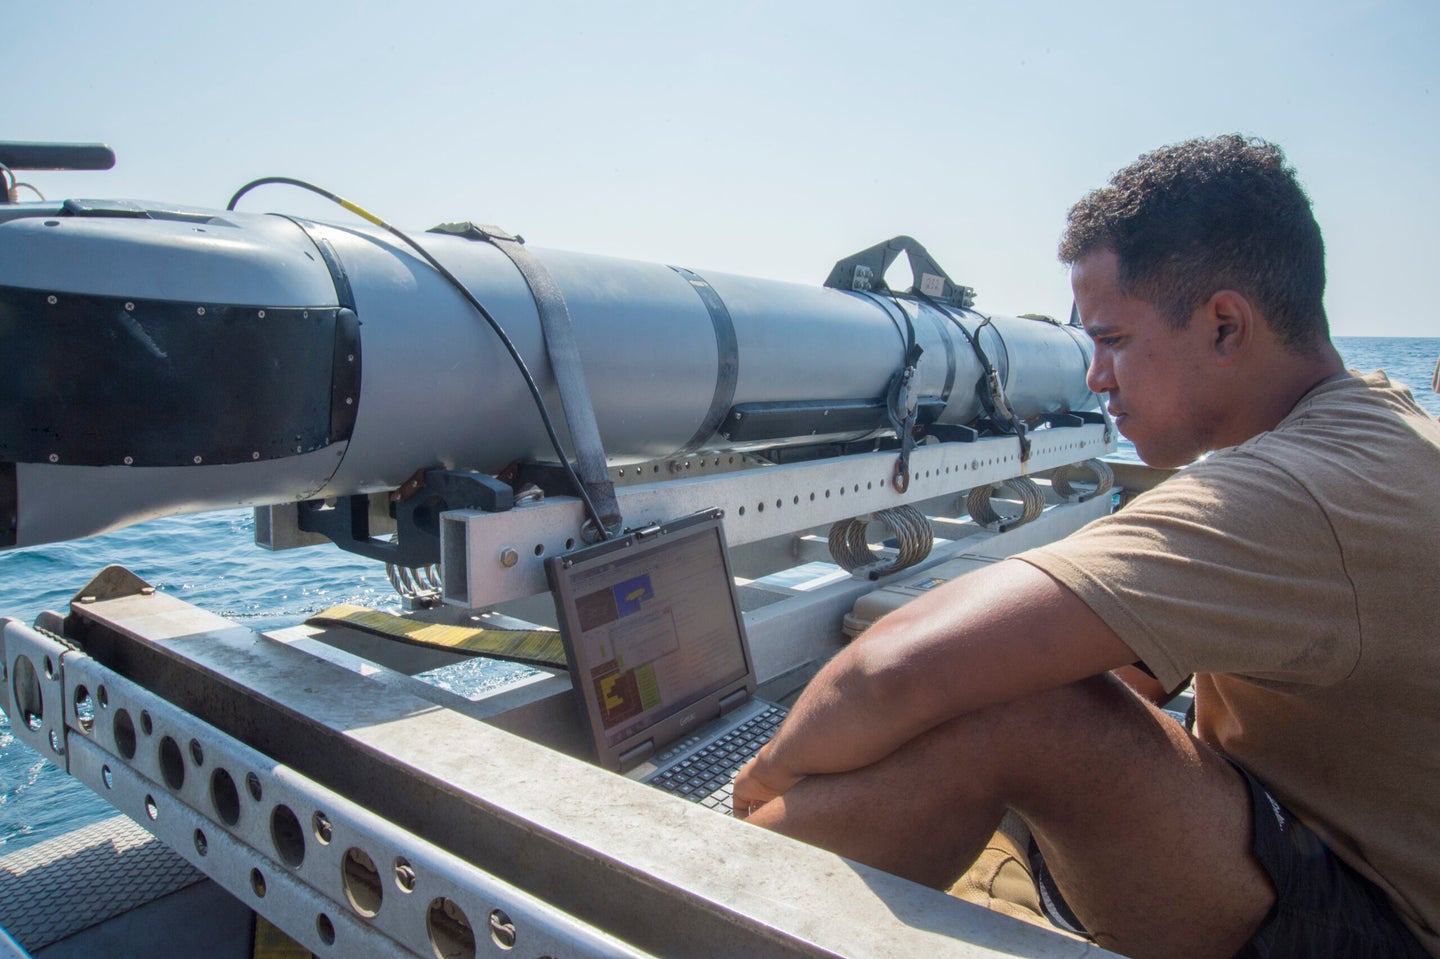 151027-N-JC374-058 ARABIAN GULF (Oct. 27, 2015) Mineman 3rd Class John Stephen-Torres, assigned to Commander, Task Group (CTG) 56.1, observes data from a MK 18 MOD 2 unmanned underwater vehicle (UUV) for a training evolution during a squadron exercise (SQUADEX). (U.S. Navy photo by Mass Communication Specialist 3rd Class Jonah Stepanik/Released)